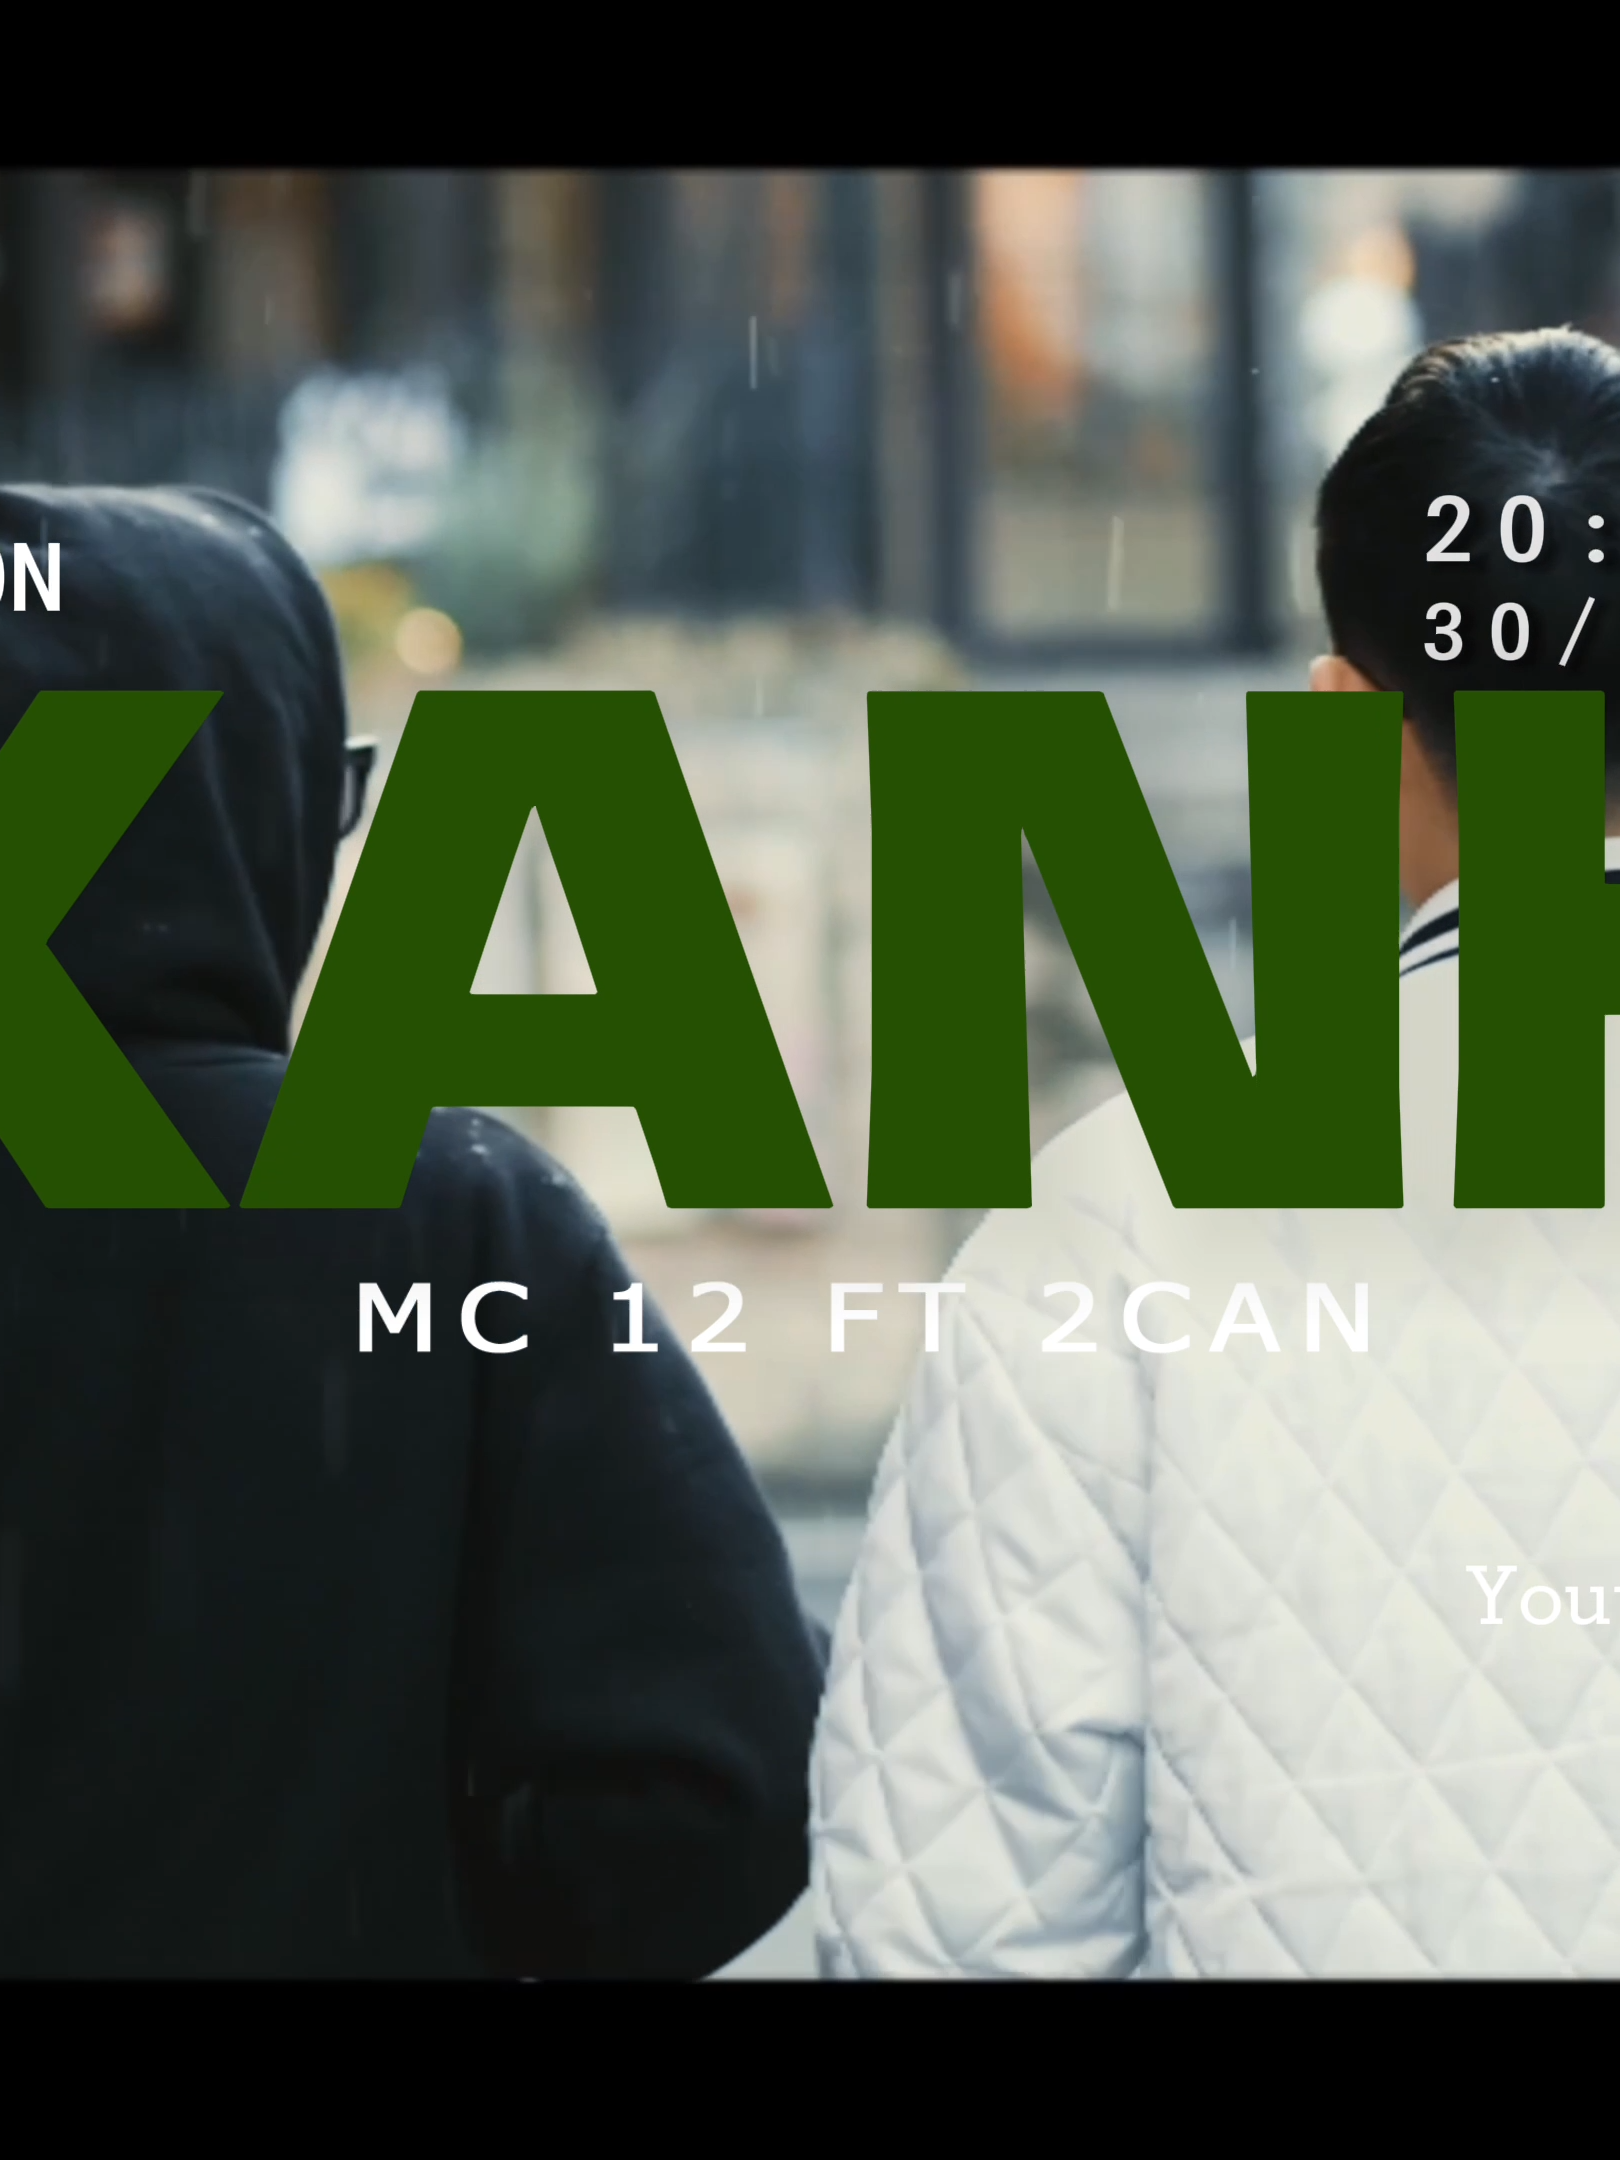 2CAN | XANH ft MC12 | OFFICIAL TEASER #2Can #Freestyle #hiphop MV is coming soon | 20:22PM 